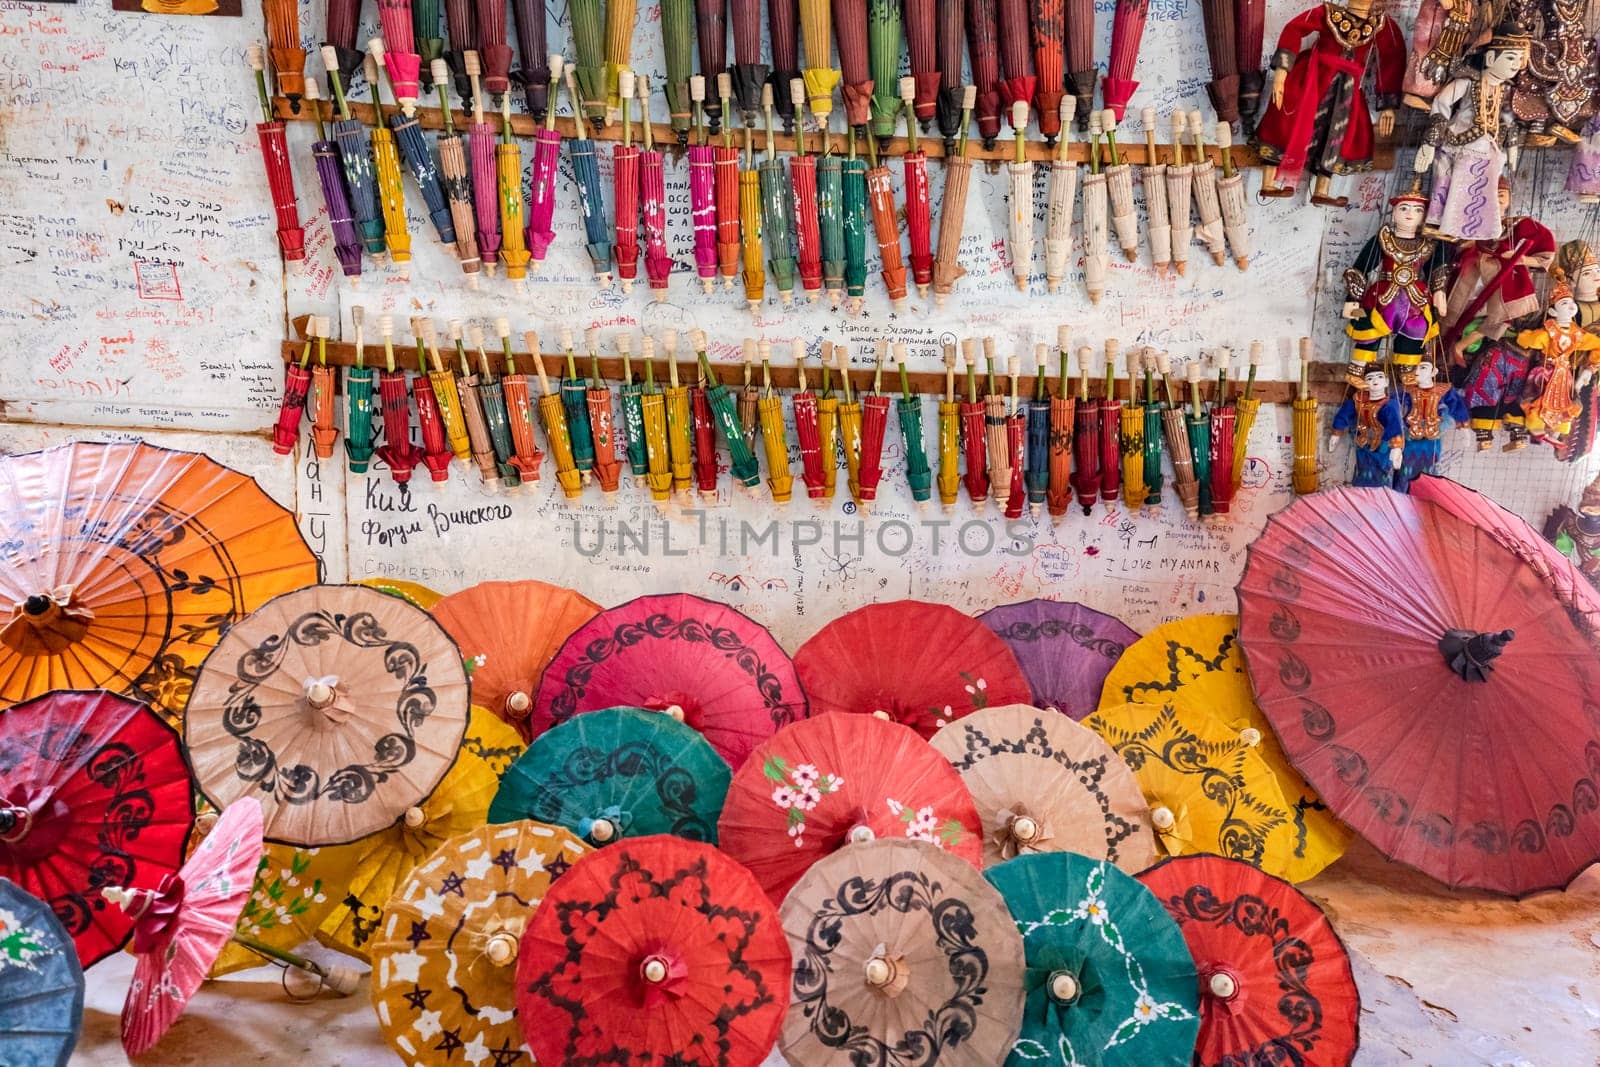 Exhibition of handmade paper parasols in a small handicraft manufactory in Pindaya, Myanmar, Asia